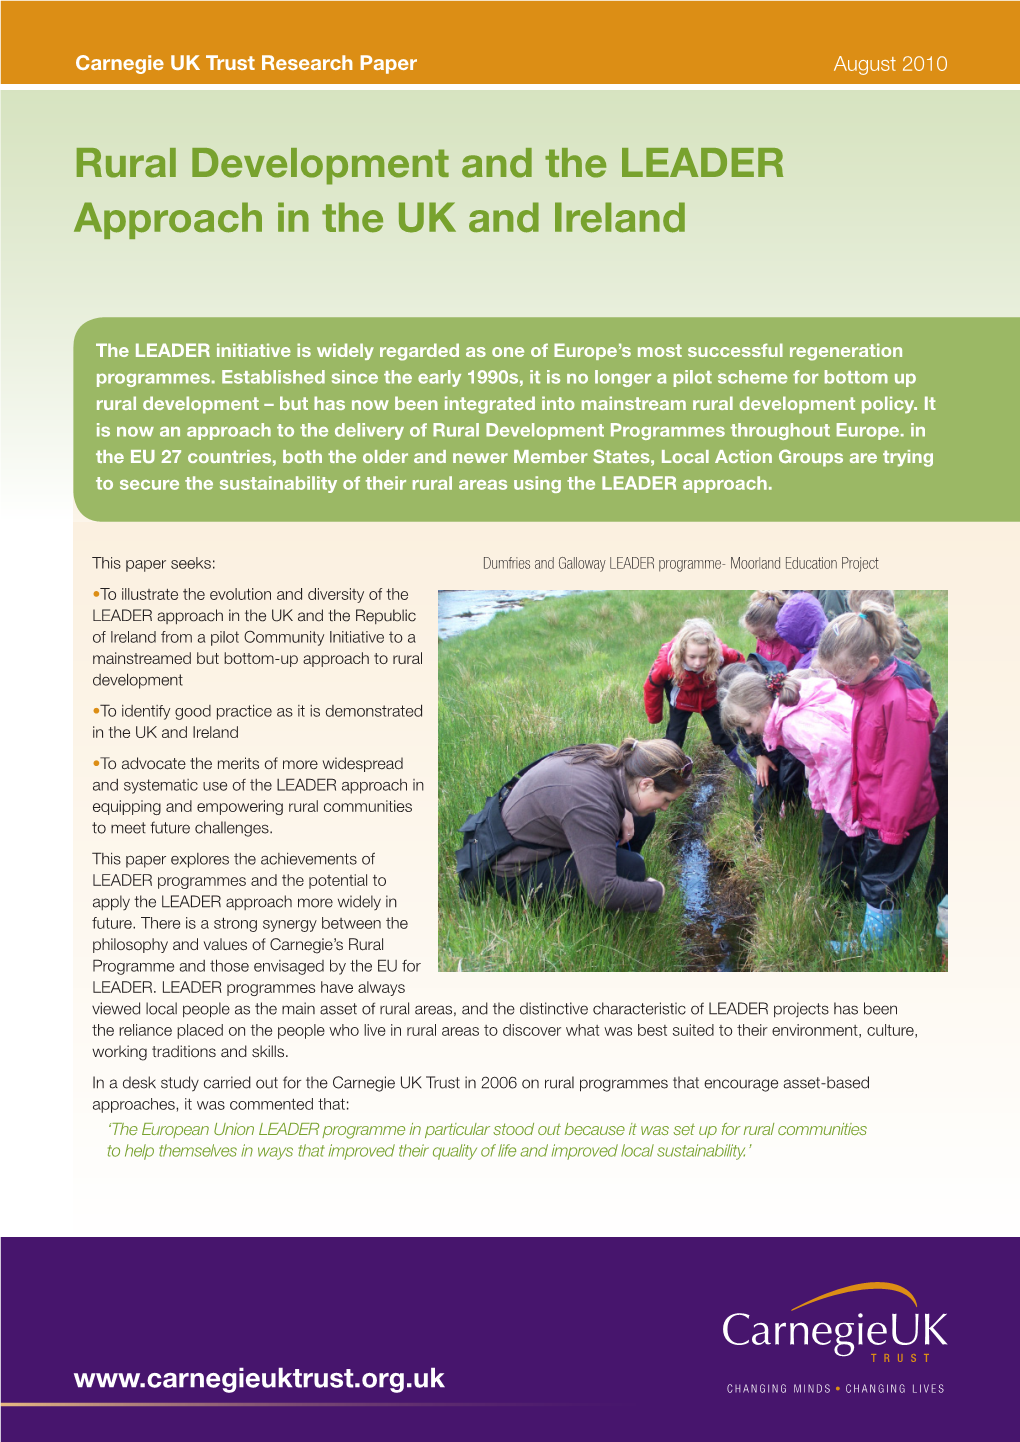 Rural Development and the LEADER Approach in the UK and Ireland